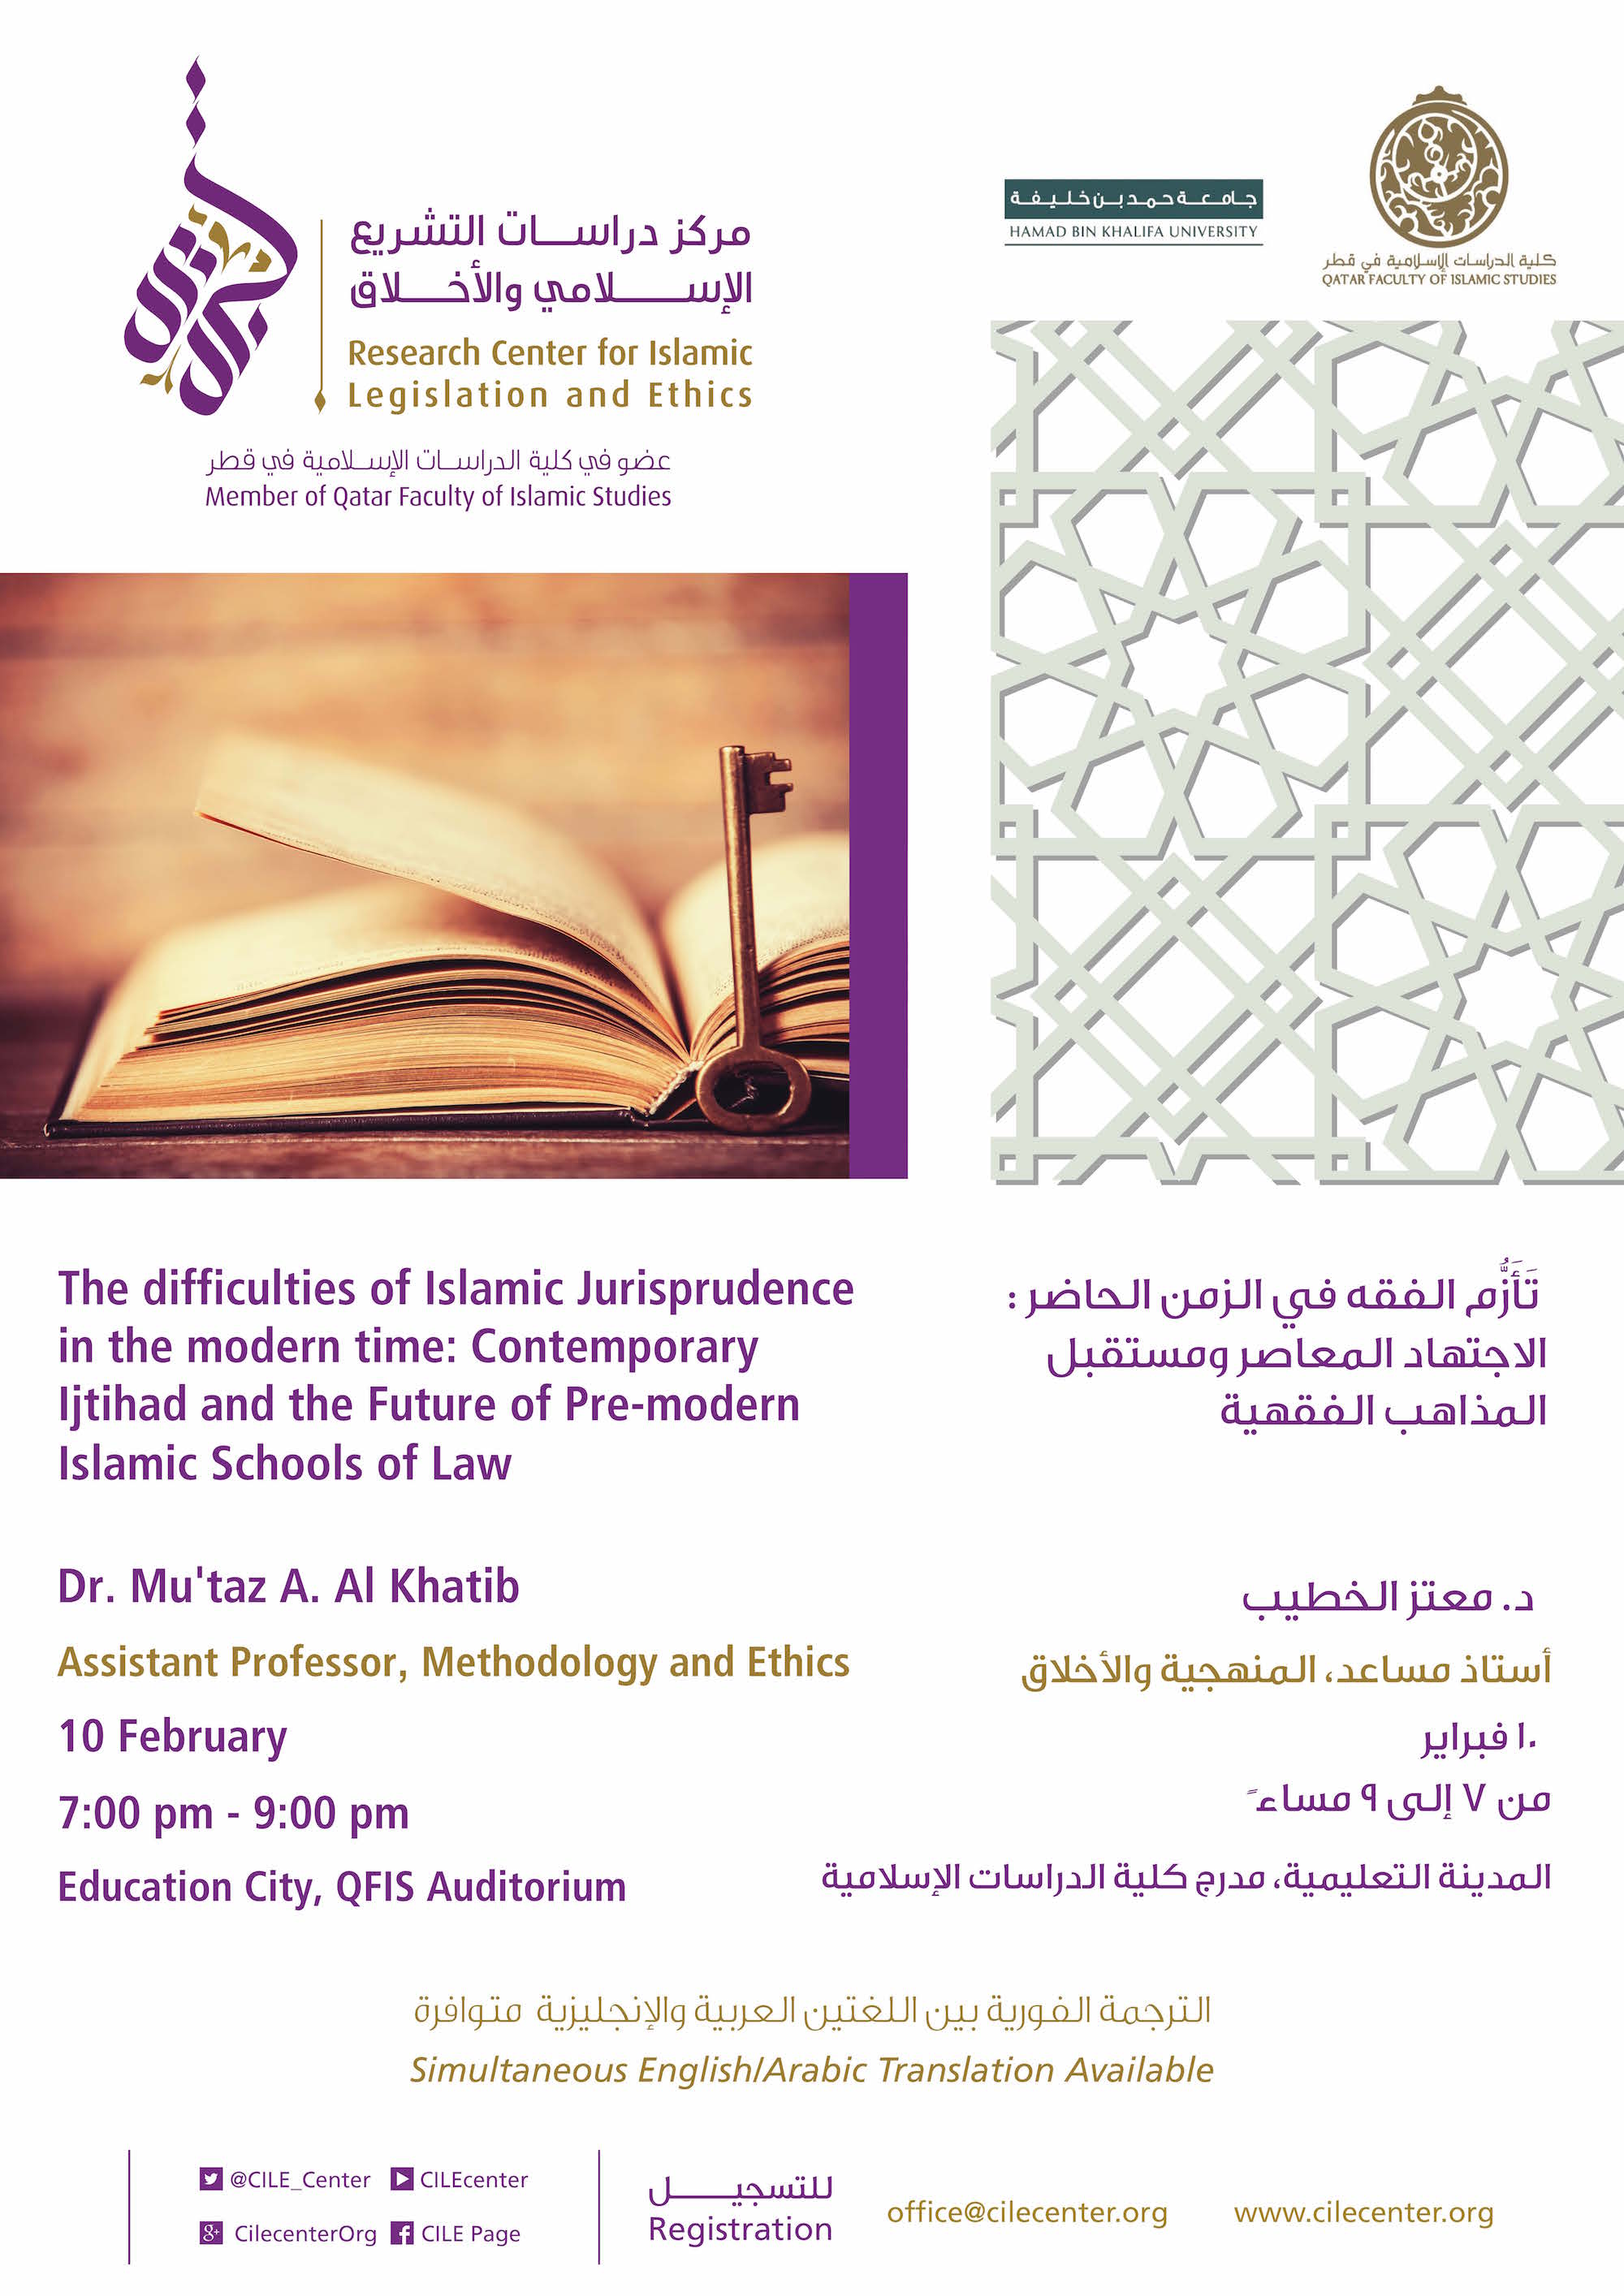 02/2016 The difficulties of Islamic Jurisprudence in the modern time: Contemporary Ijtihad and the Future of Pre-modern Islamic Schools of Law